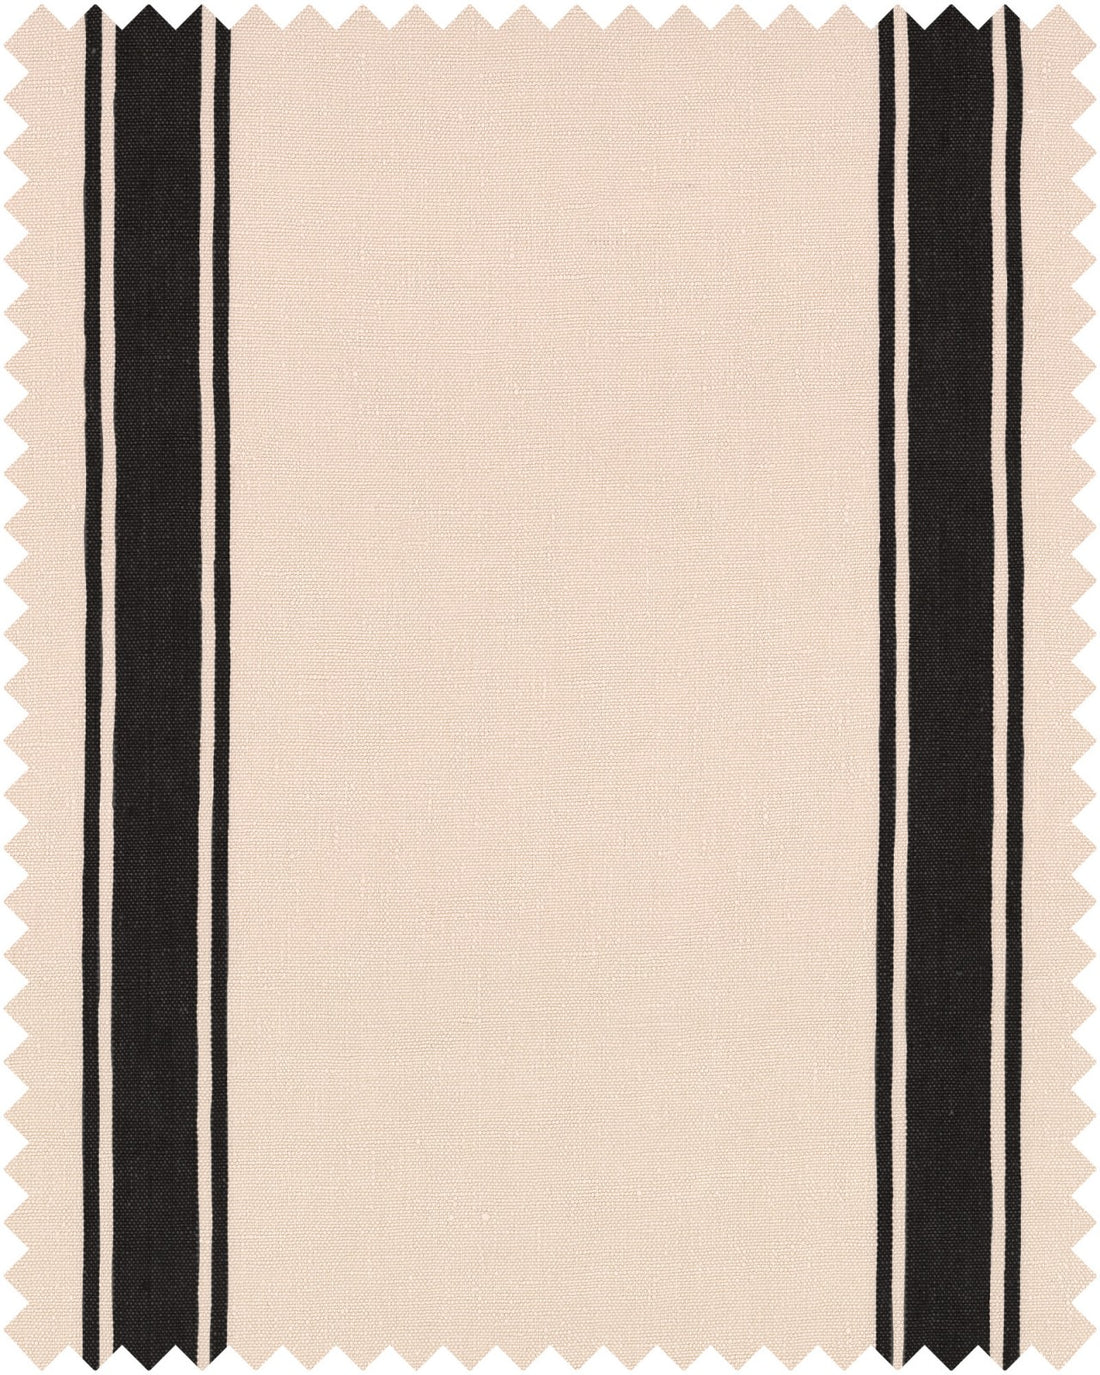 Hajdu Stripe fabric in heavy linen color - pattern number FB00057 - by Mind The Gap in the Transylvanian Roots collection